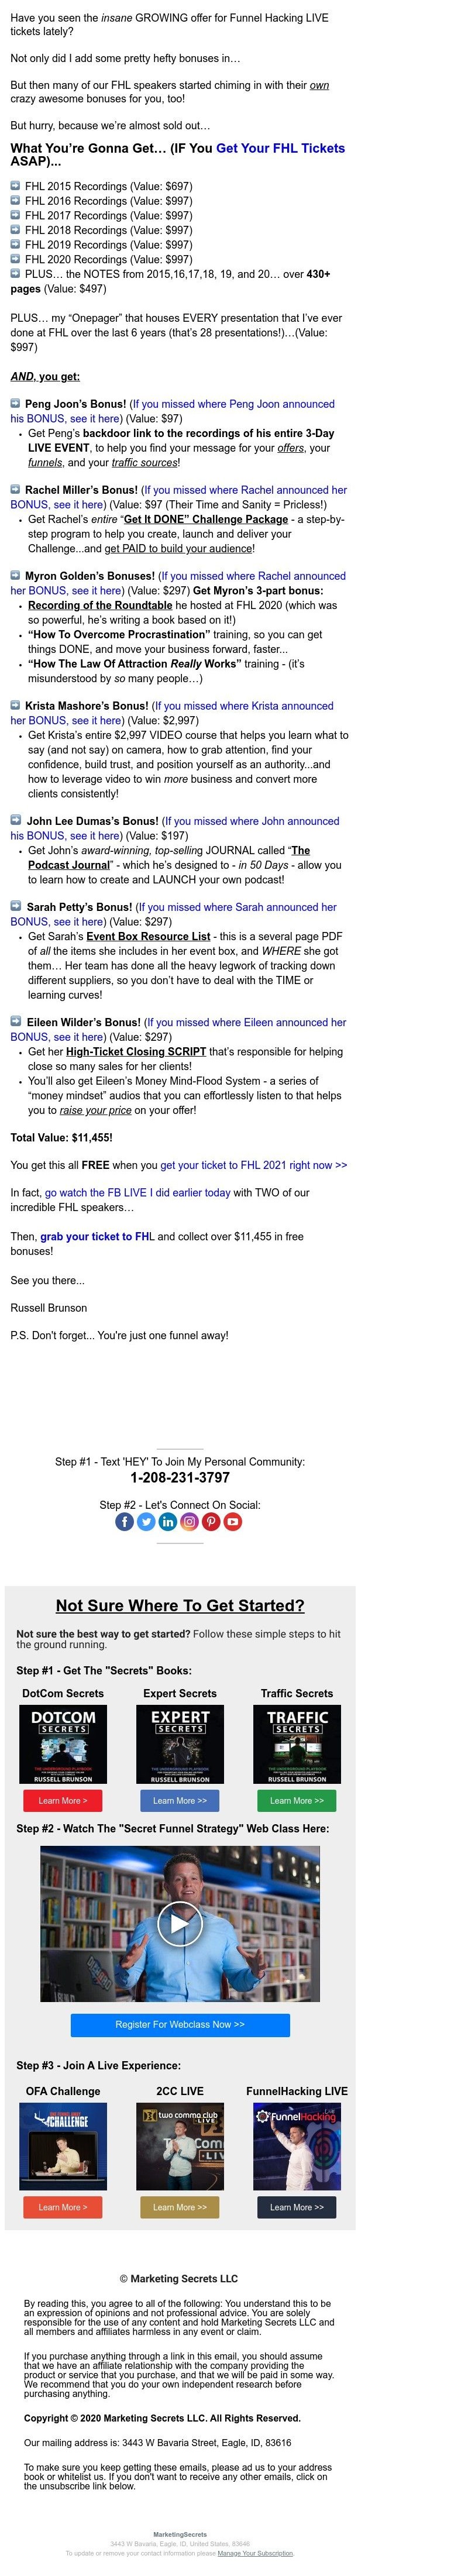 Screenshot of email with subject /media/emails/ee28860d-9749-4929-971a-a8b9796842ed.jpg